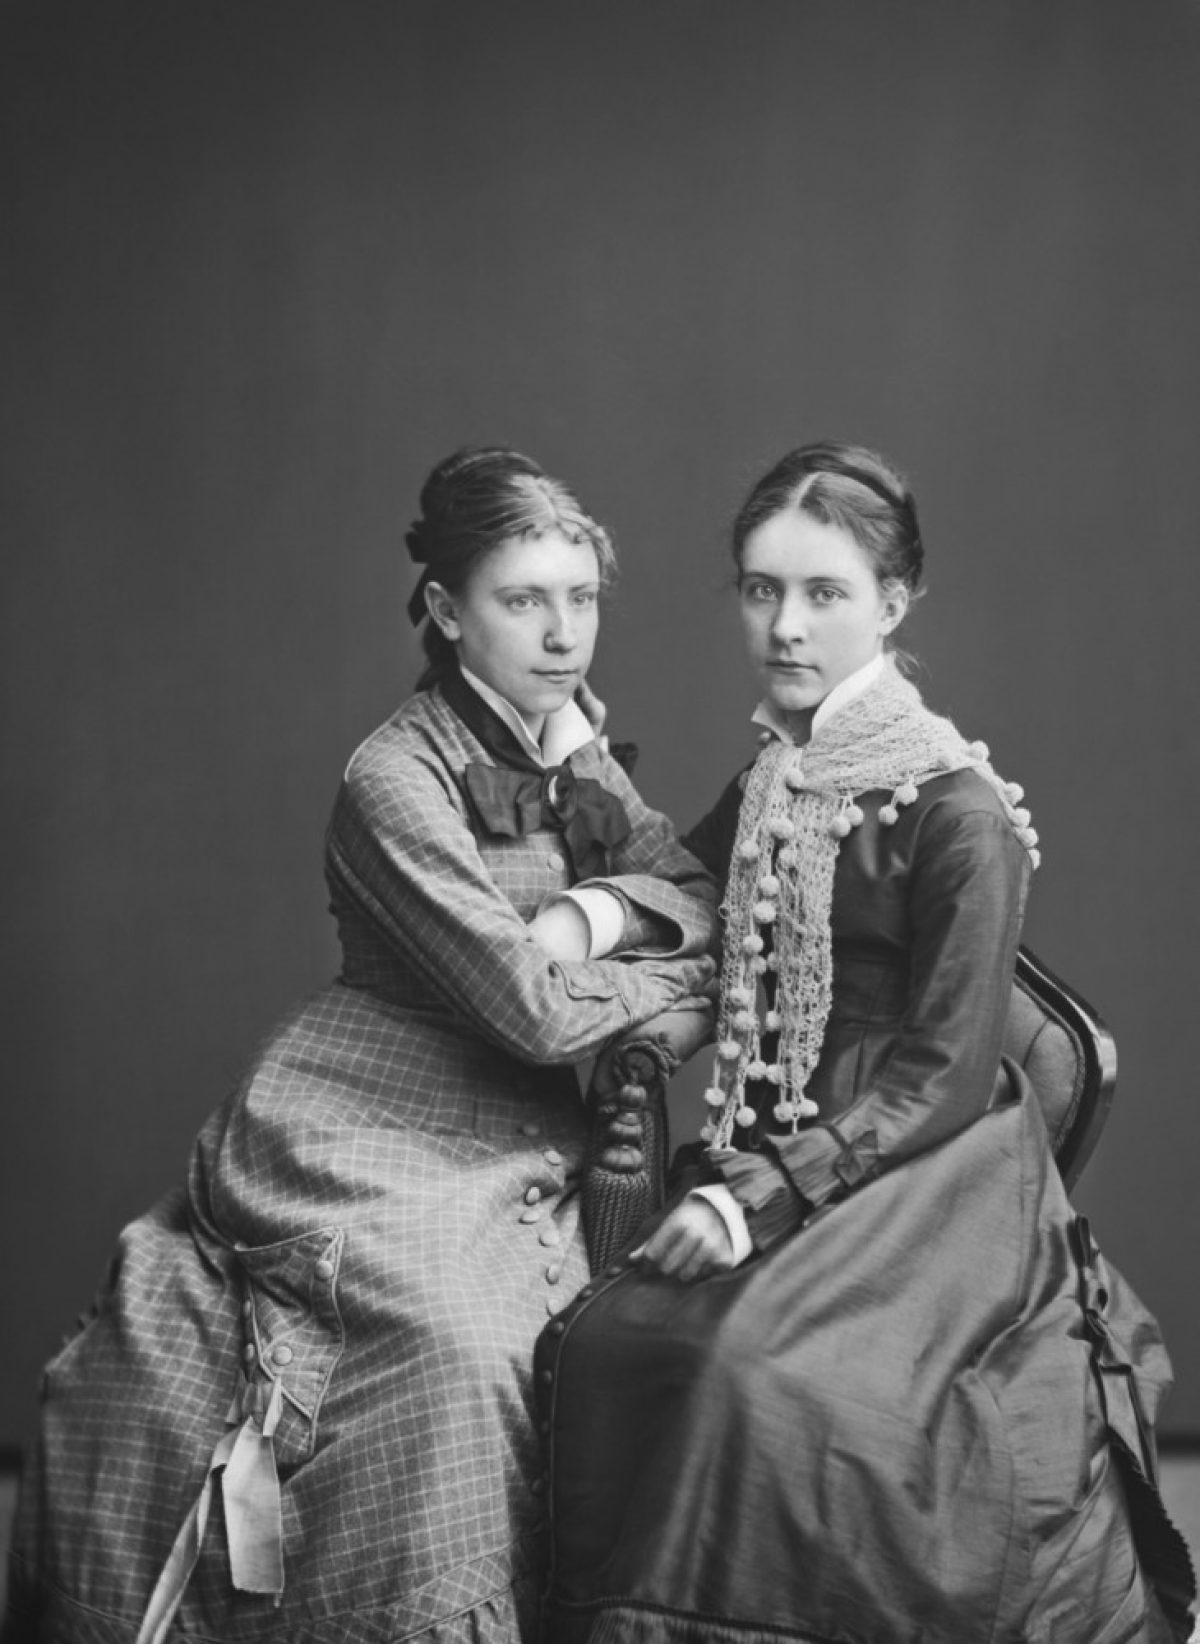 The Misses Lilli Törnudd and Vivia Törnudd. Lilli Törnudd worked as a teacher in art and crafts and was one of the educational reformers of the turn of the 19th and 20th centuries. Photo: Daniel Nyblin / Picture Collections of the Finnish Heritage Agency